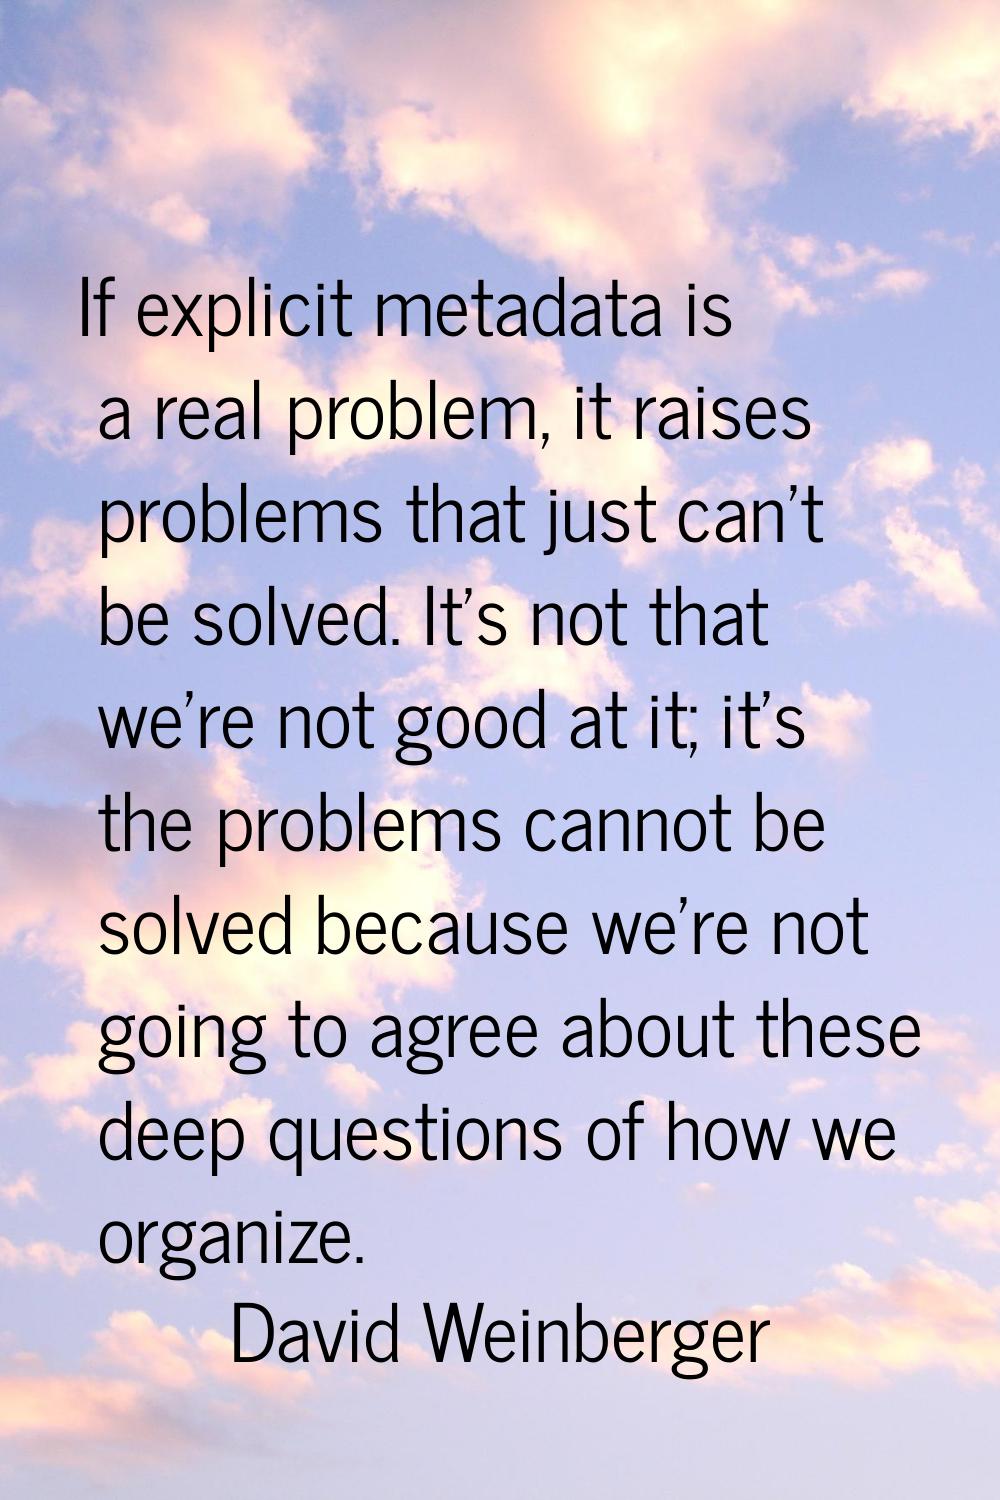 If explicit metadata is a real problem, it raises problems that just can't be solved. It's not that